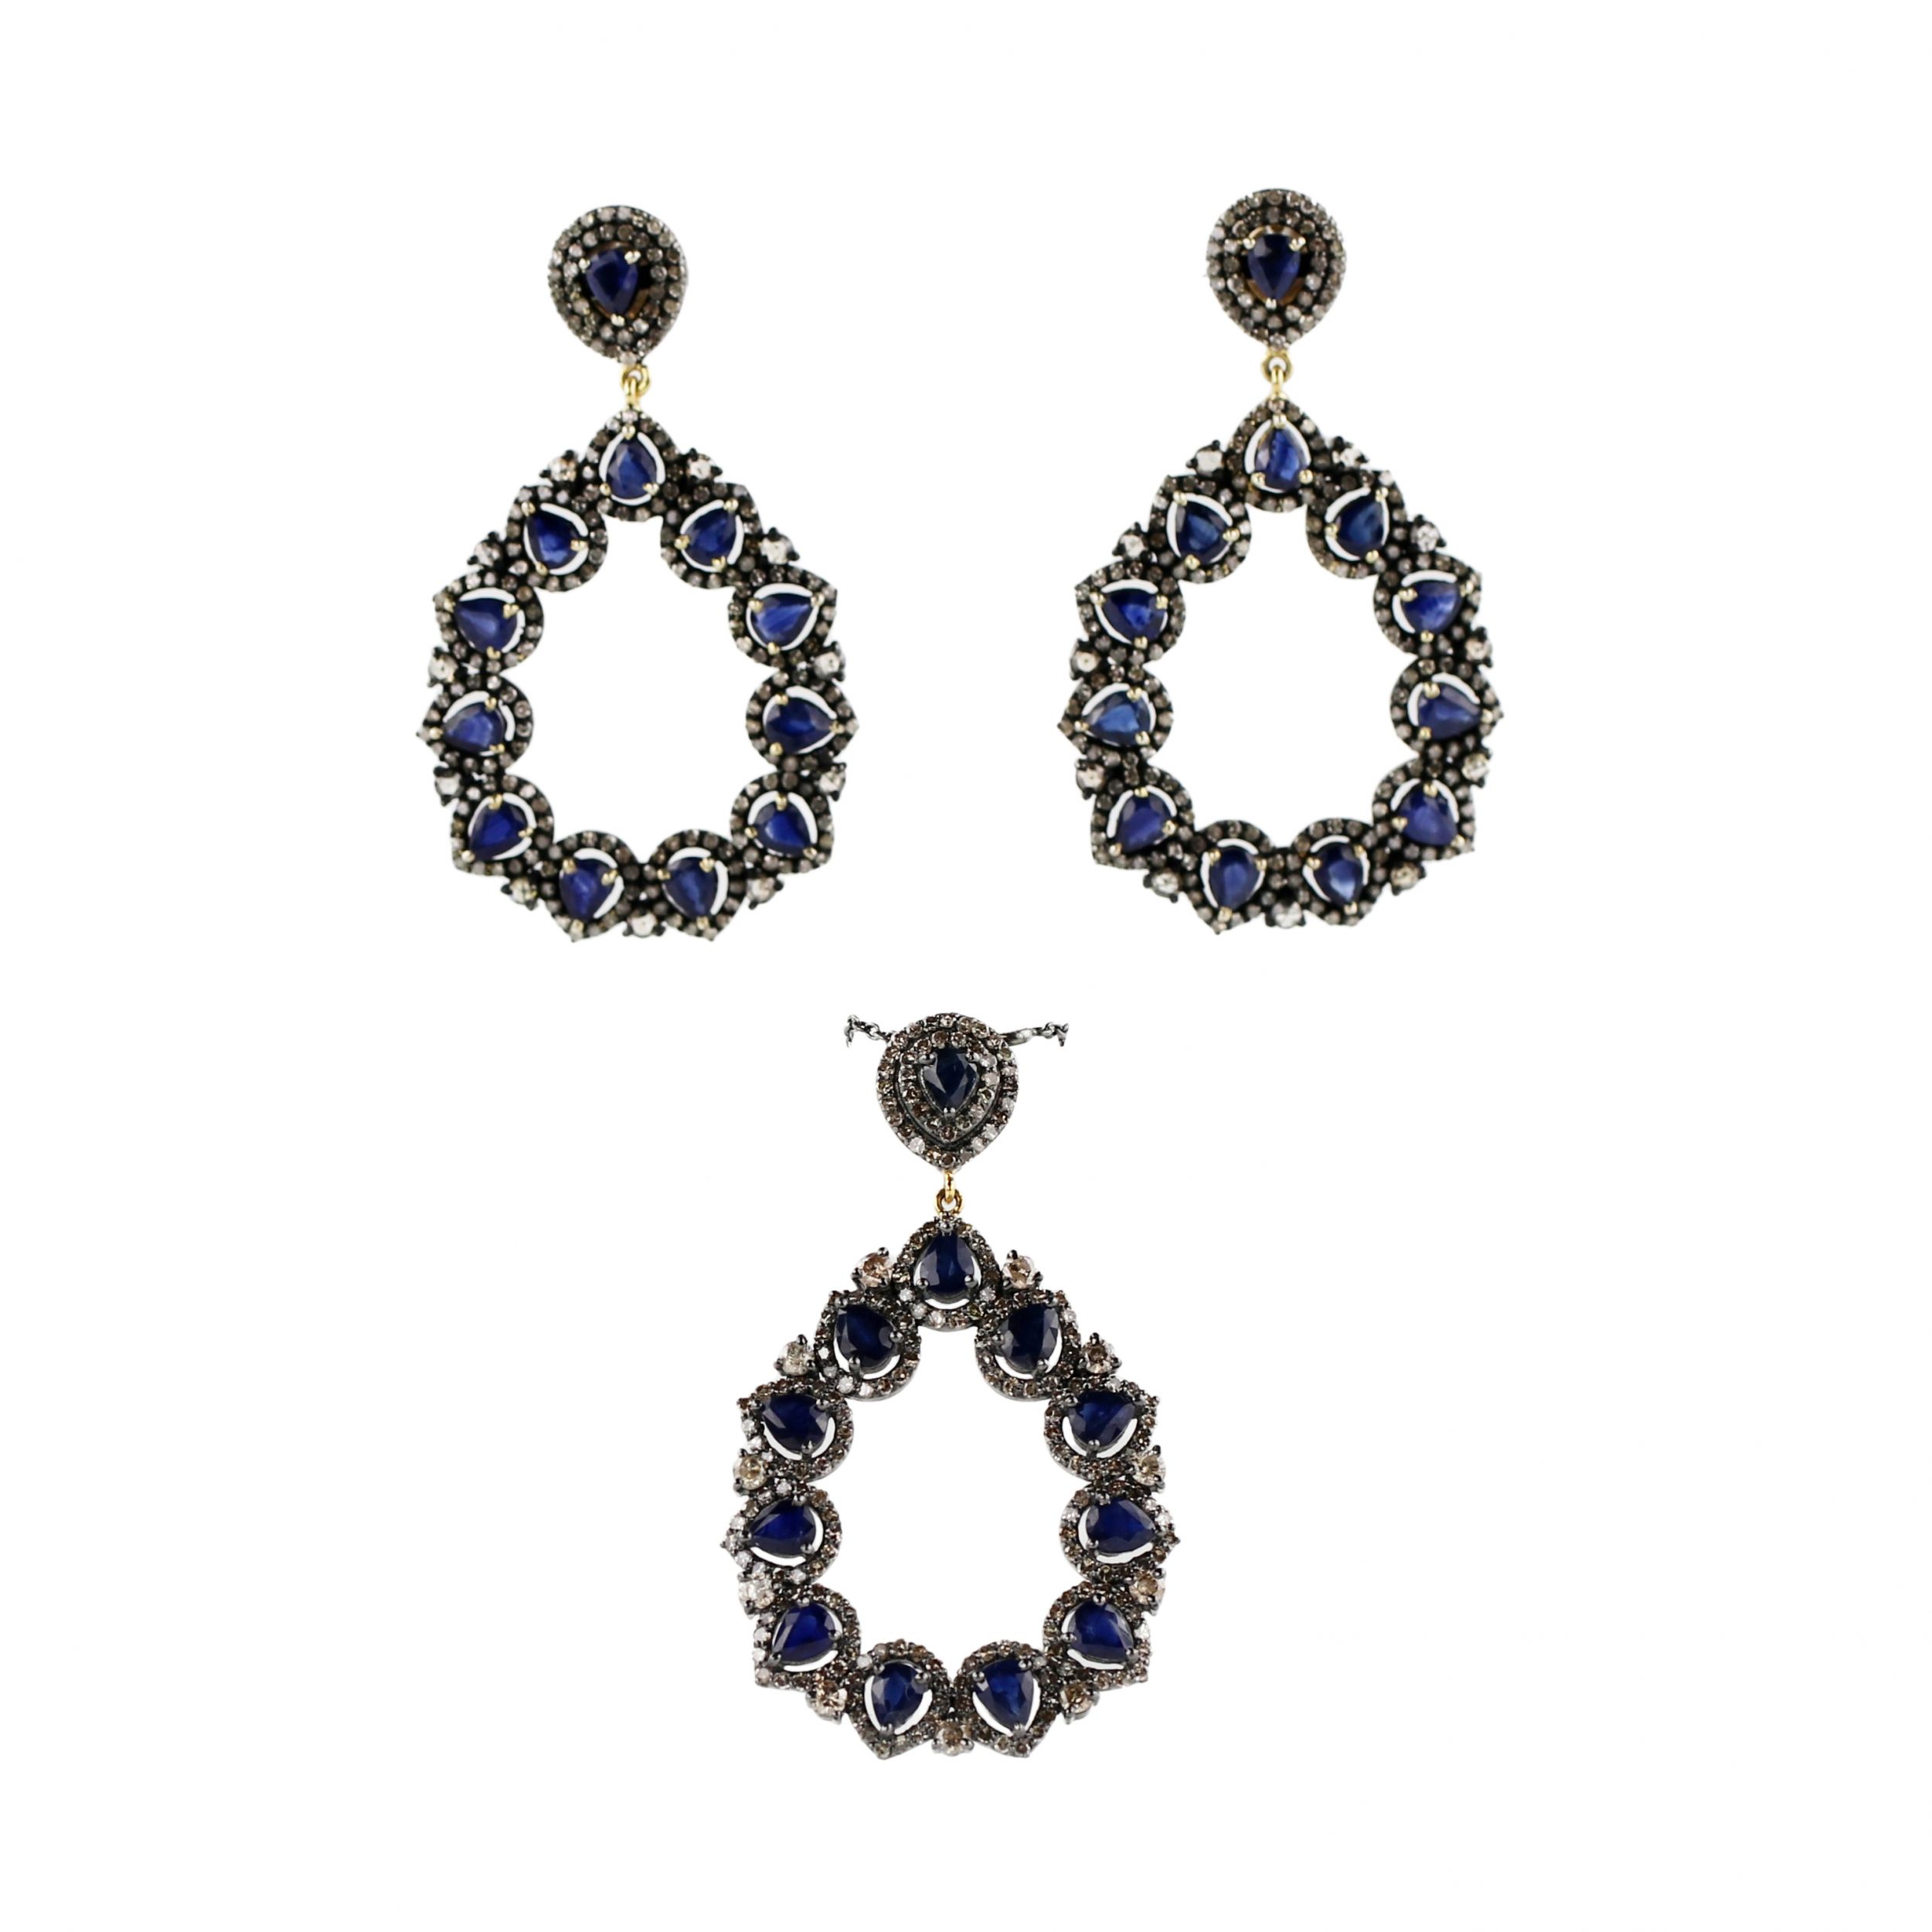 Set-of-earrings-pendant-with-sapphires-and-diamonds-on-silver-and-gold-